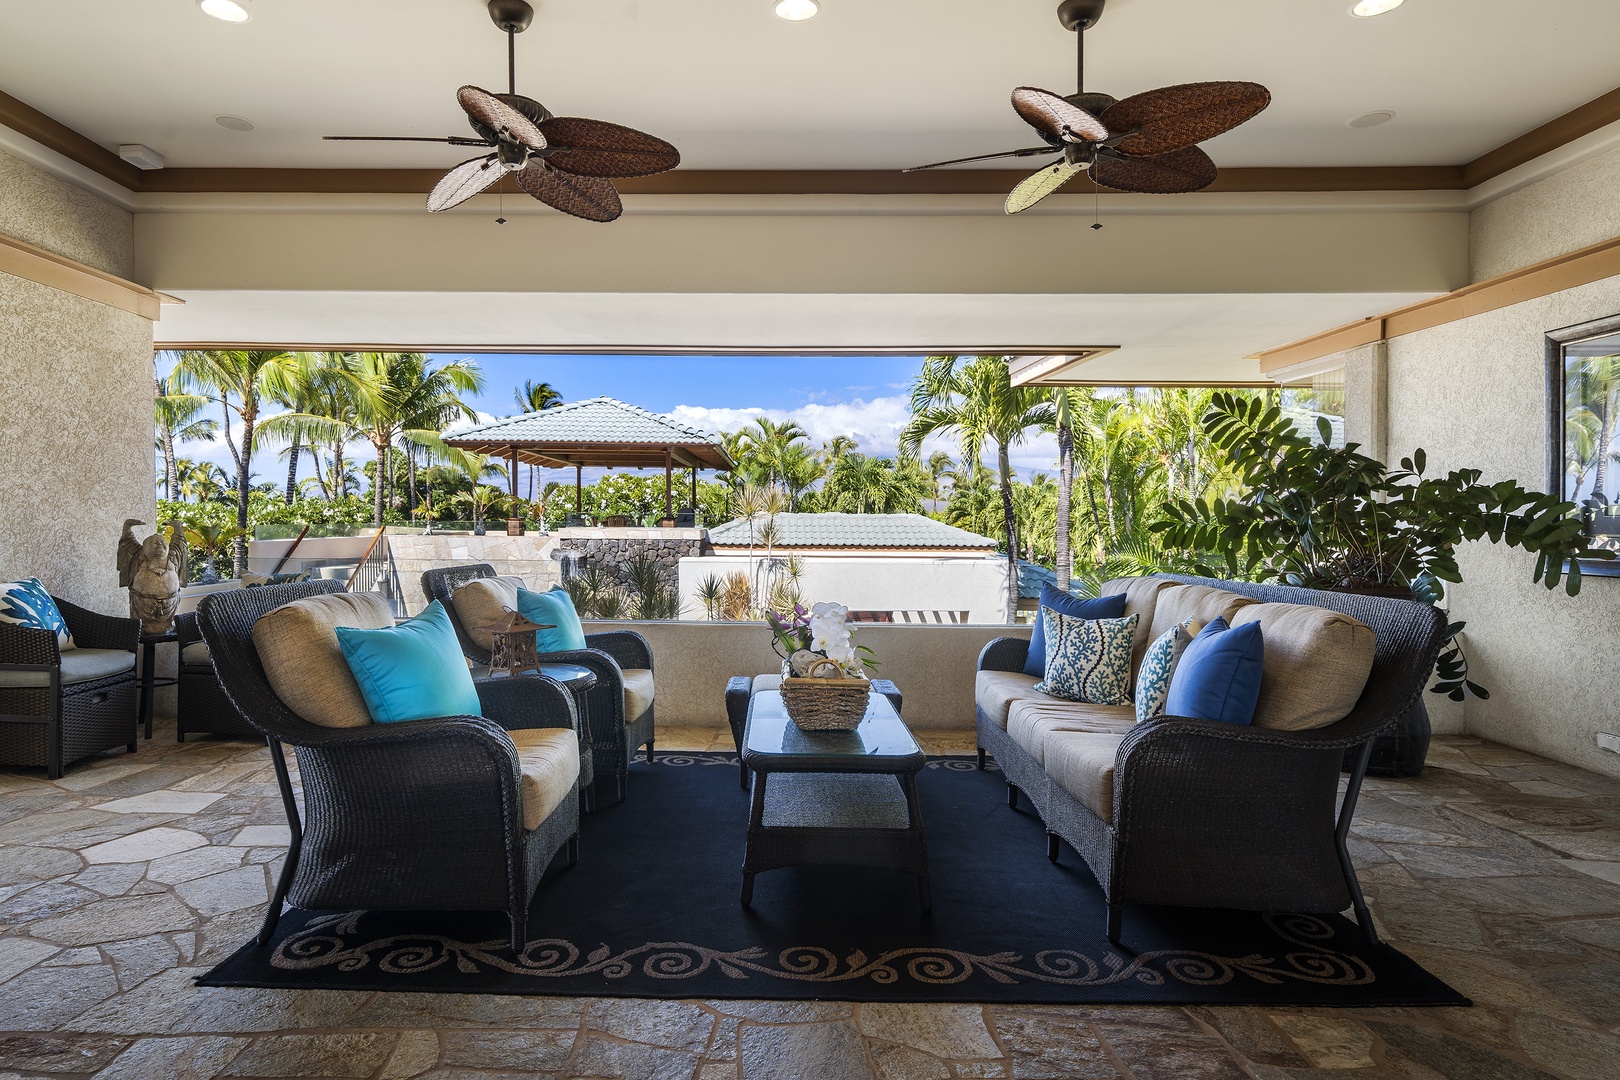 Kamuela Vacation Rentals, Champion Ridge #35 - Upstairs Lanai off the living room overlooking the expansive pool